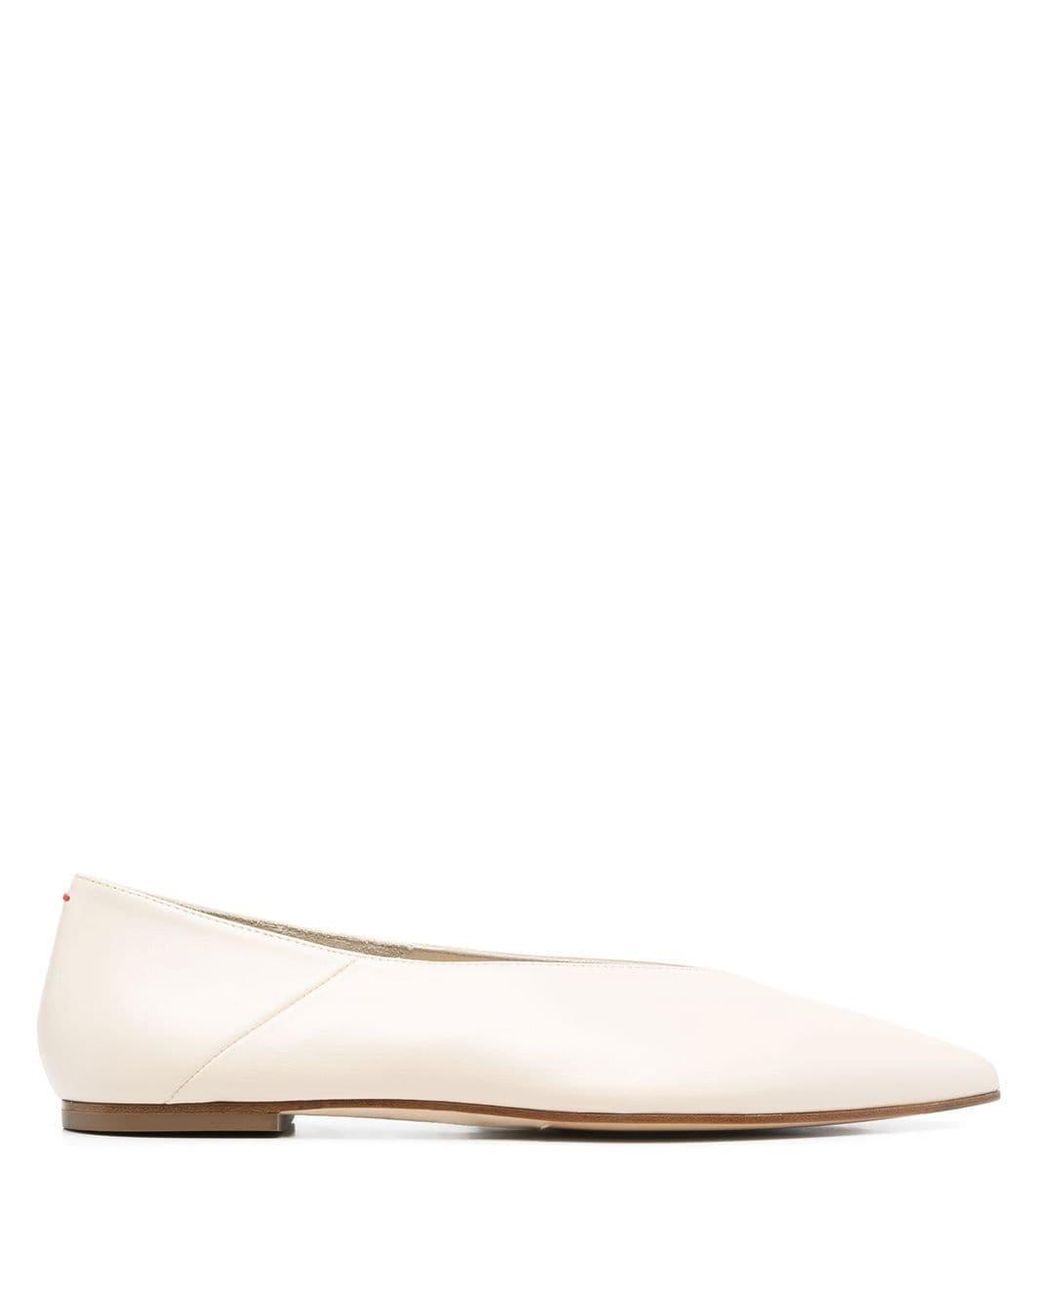 Aeyde Moa Suede Ballerina Shoes in Natural | Lyst